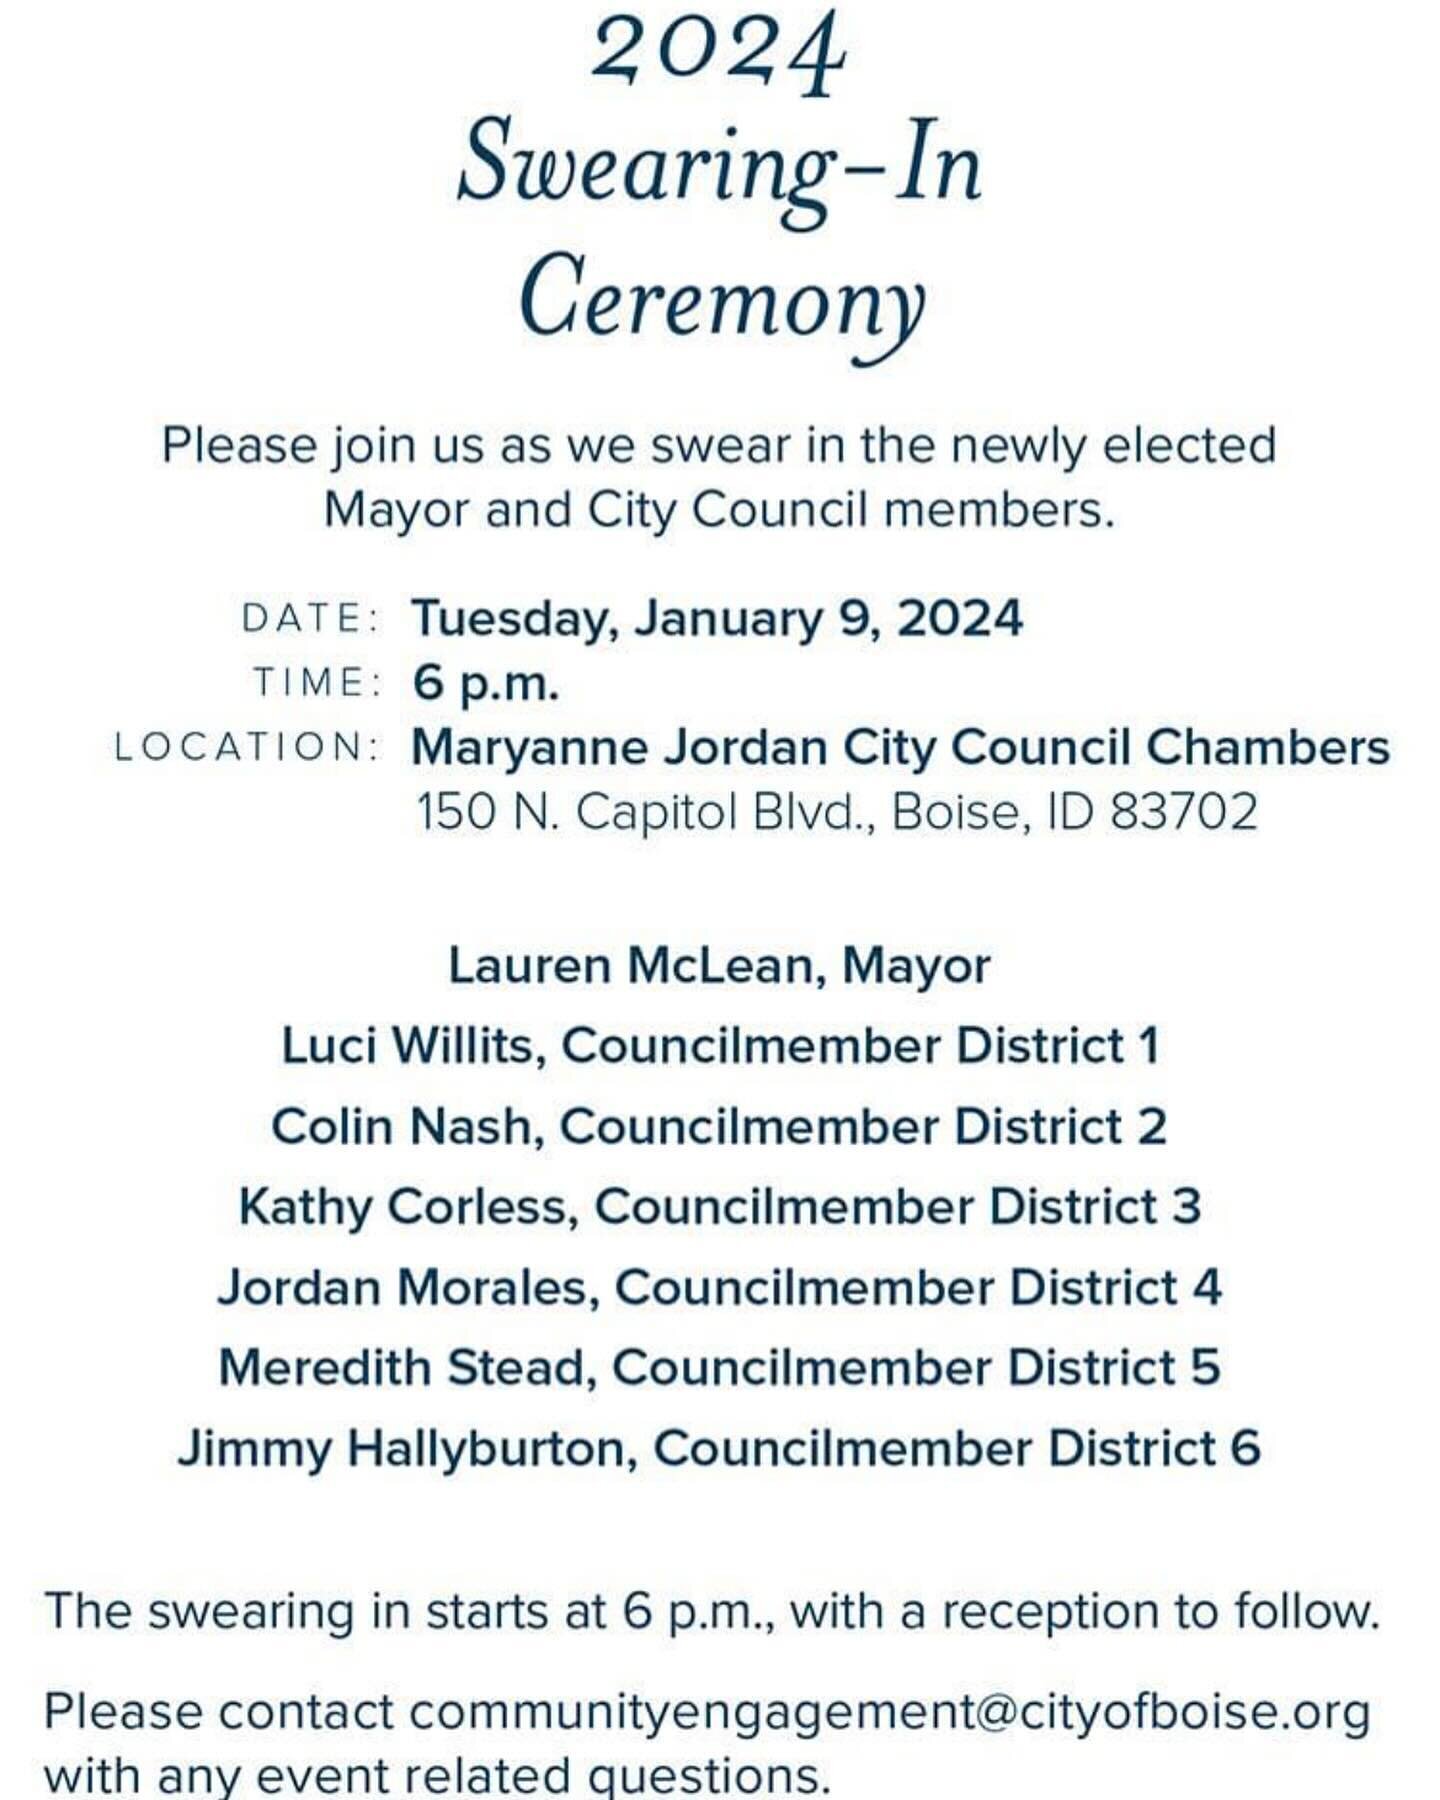 It takes so many involved and dedicated community members to keep our city moving in the right direction and this is ever apparent during the election process. Please join us on Jan 9 to celebrate as the new council and the mayor&rsquo;s 2nd term are